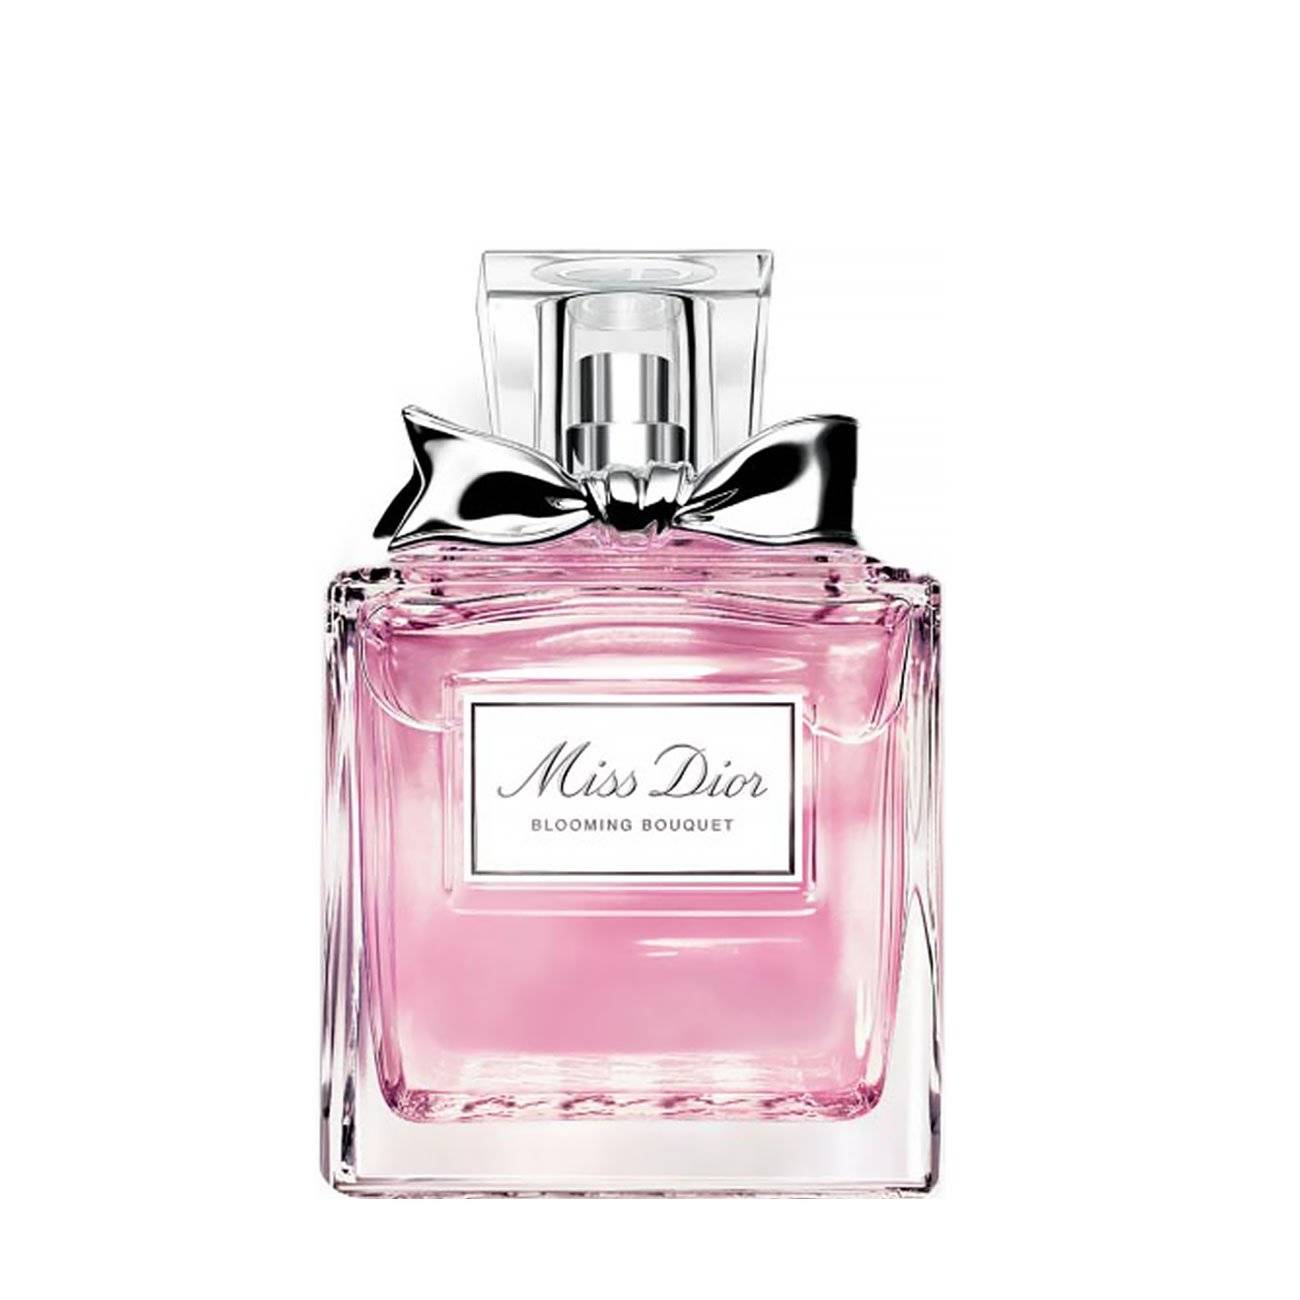 MISS DIOR BLOOMING BOUQUET 100 ml 100